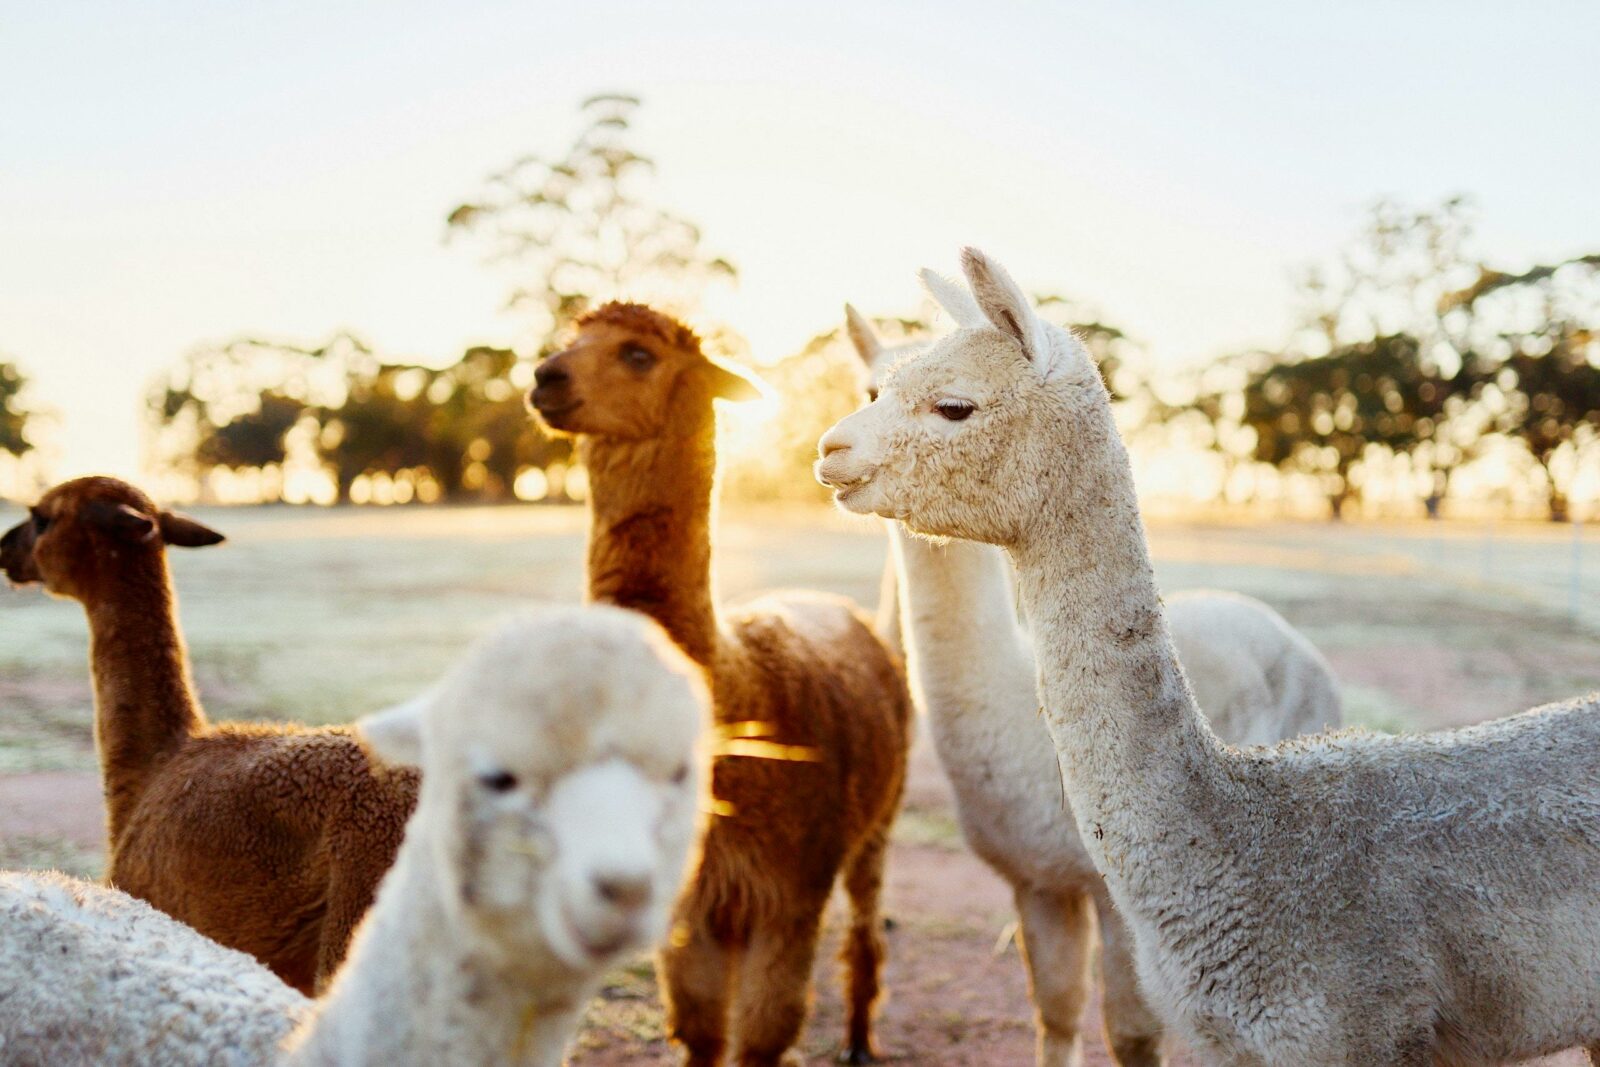 A group of alpacas standing around in the sunrise. The scenery is peaceful and picturesque